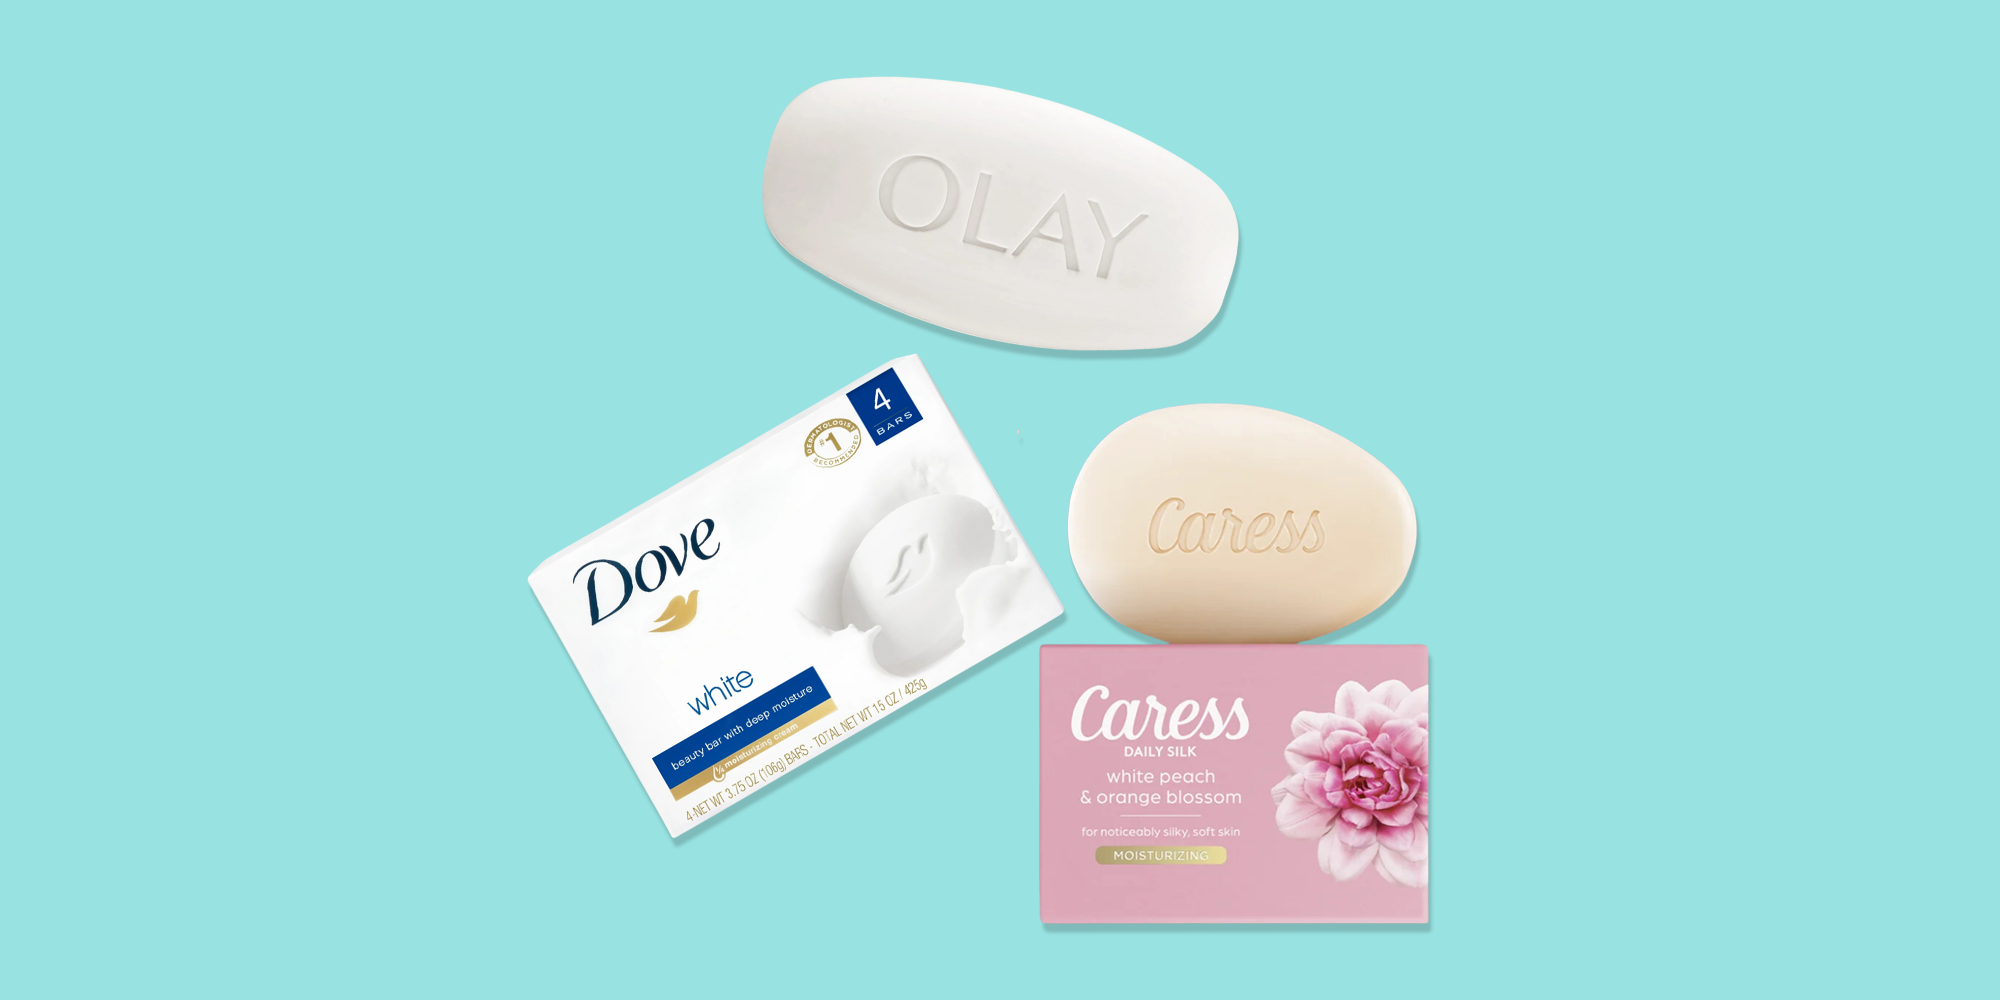 <p>Bar soaps, while nothing new, are having a resurgence at the moment. And they're trending for good reason: Besides helping to <a href="https://www.goodhousekeeping.com/beauty-products/g28637910/best-makeup-removers/">remove makeup</a>, oil and general dirt and grime from the skin, many options currently available "incorporate milder surfactants such as Sodium Cocoyl Isethionate, which <strong>work both in soft and hard water and are less drying than traditional soaps</strong>," explains GH Beauty, Health and Sustainability Lab Director <a href="https://www.goodhousekeeping.com/author/1473/sabina-wizemann/">Sabina Wizemann</a>. </p><p>They're also convenient — many can be used on both face and body and are portable and travel-safe, notes <a href="https://www.instagram.com/drmonicali/?hl=en">Monica Li, M.D.</a>, double board-certified dermatologist and Clinical Assistant Professor for the Department of Dermatology and Skin Science at the University of British Columbia. Bar soap is also waterless, so it's "less likely to harbor bacteria as long as it is not stored in water, which also means less preservatives tend to be added," Dr. Li adds.</p><p>The <a href="https://www.goodhousekeeping.com/institute/about-the-institute/a19748212/good-housekeeping-institute-product-reviews/">Good Housekeeping Institute</a> Beauty Lab has evaluated bar soaps, taking into consideration aspects like how well they cleanse, if they leave skin feeling dry, scent and more. From bar soaps for sensitive skin and <a href="https://www.goodhousekeeping.com/beauty/anti-aging/a35565149/skin-hydration-guide/">dry skin</a> to bar soaps for everyday use, we've rounded up the best picks on the market so you can wash gently and effectively. Ahead, the <strong>10 best bar soaps for all skin types, according to experts.</strong></p>